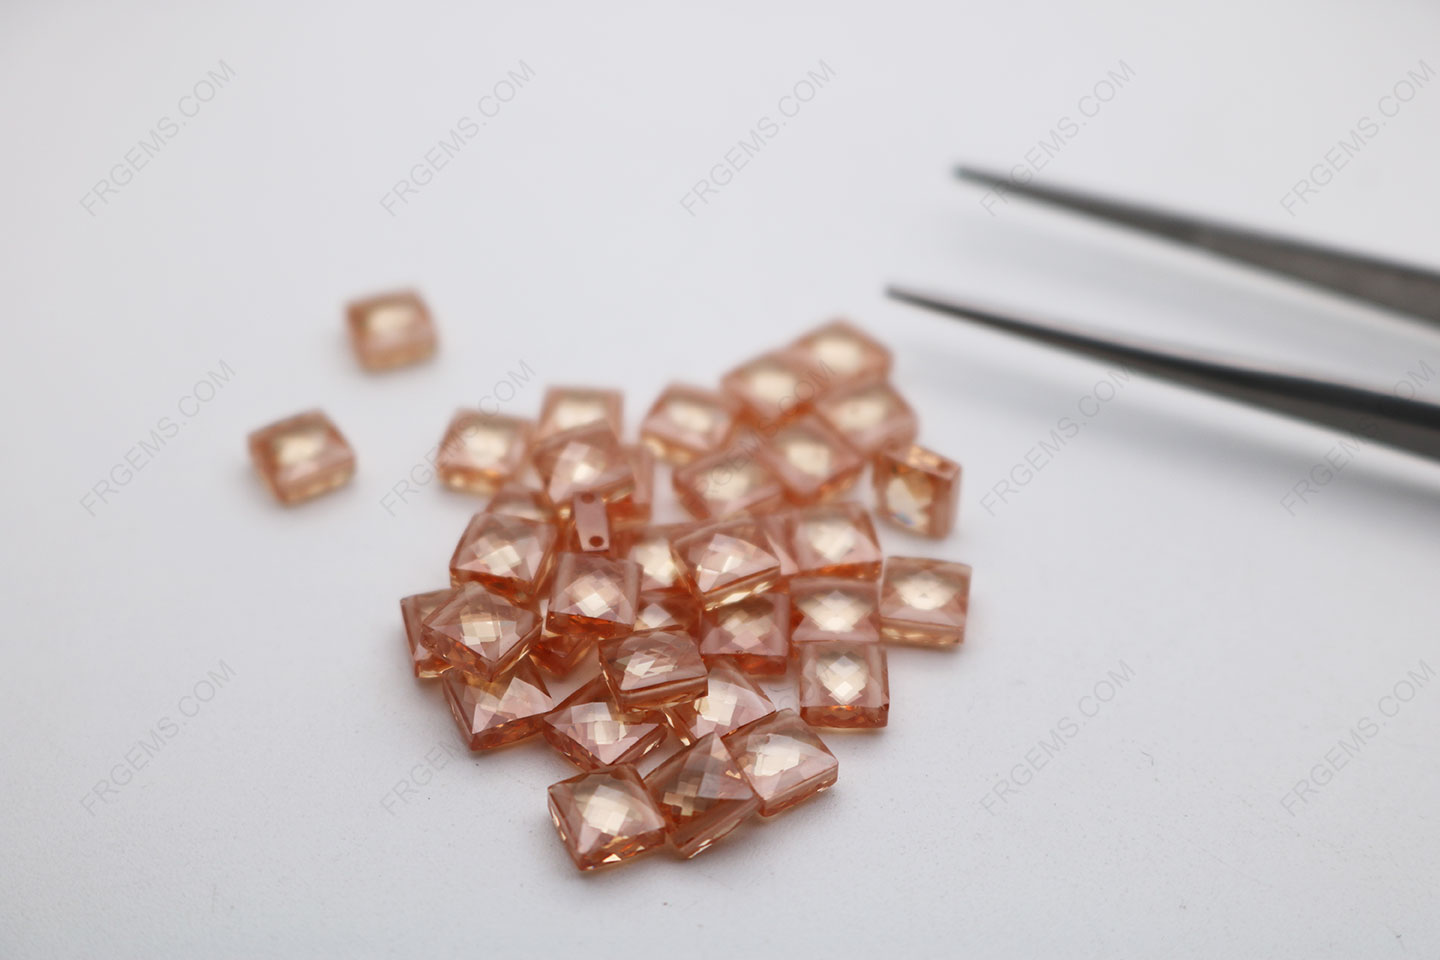 Cubic Zirconia Champagne Medium Shade Square Shape Double checkerboard Cut 5x5mm stones CZ13 IMG_2783